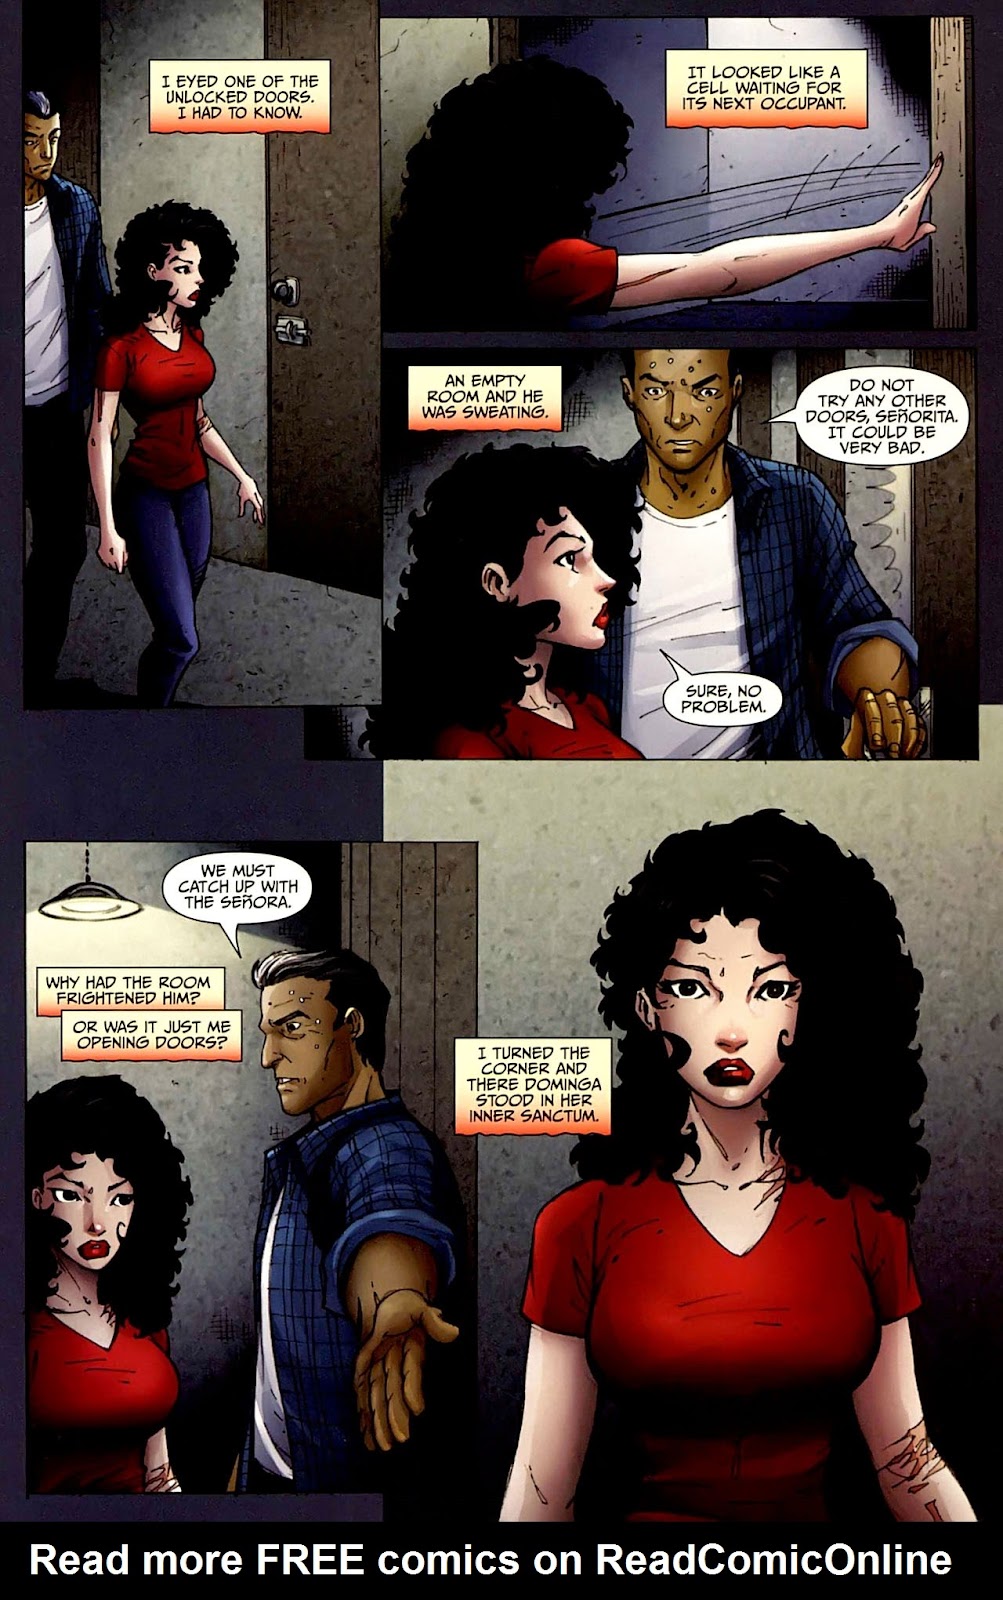 Anita Blake: The Laughing Corpse - Book One issue 2 - Page 23